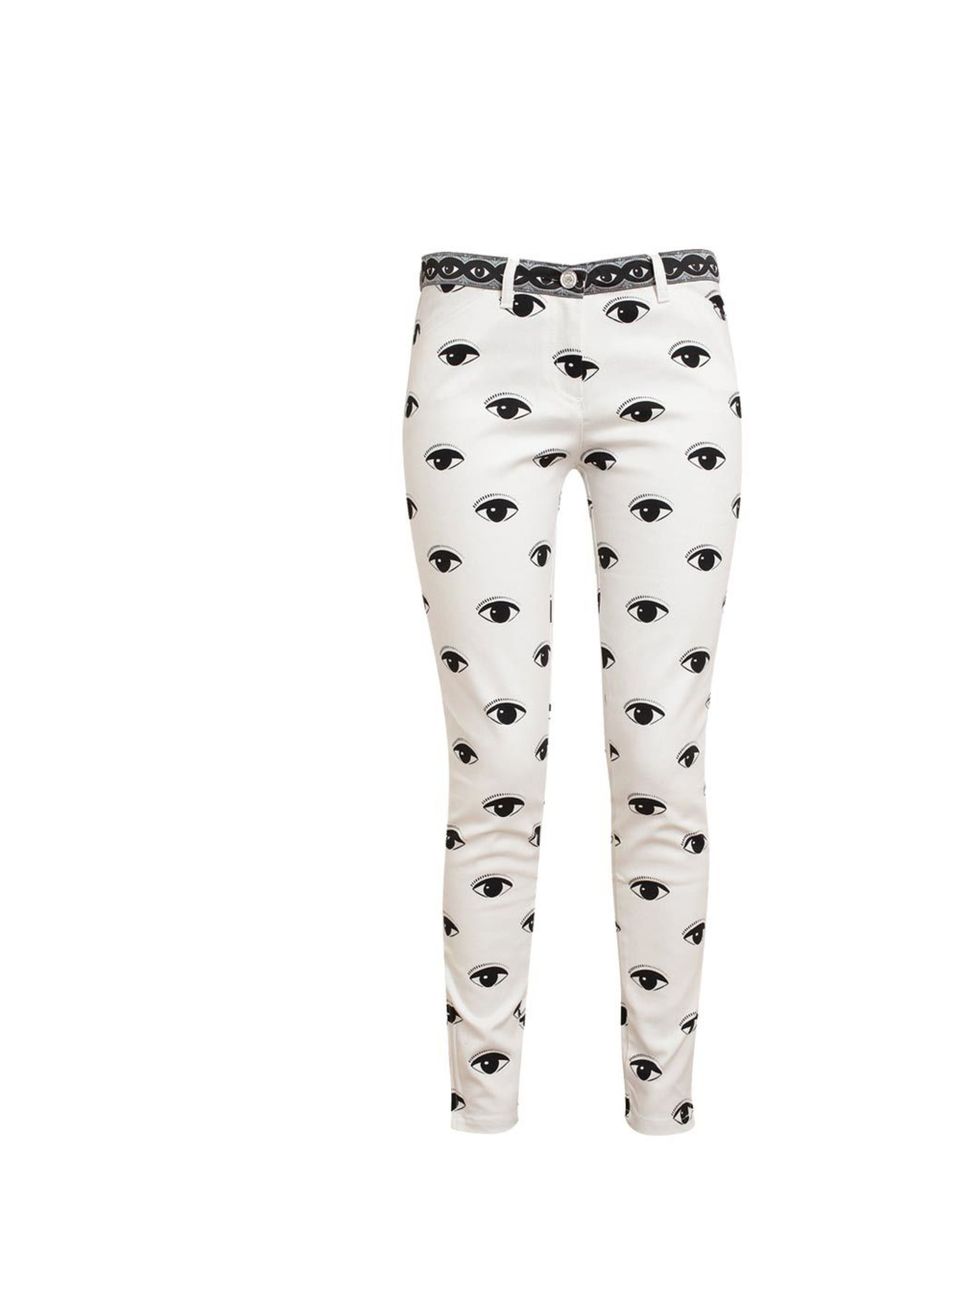 <p>Kenzo eye-print jeans, was £260 now £155, at <a href="http://www.brownsfashion.com/product/03K232710002/298/eye-printed-denim-jeans">Browns Fashion</a></p>